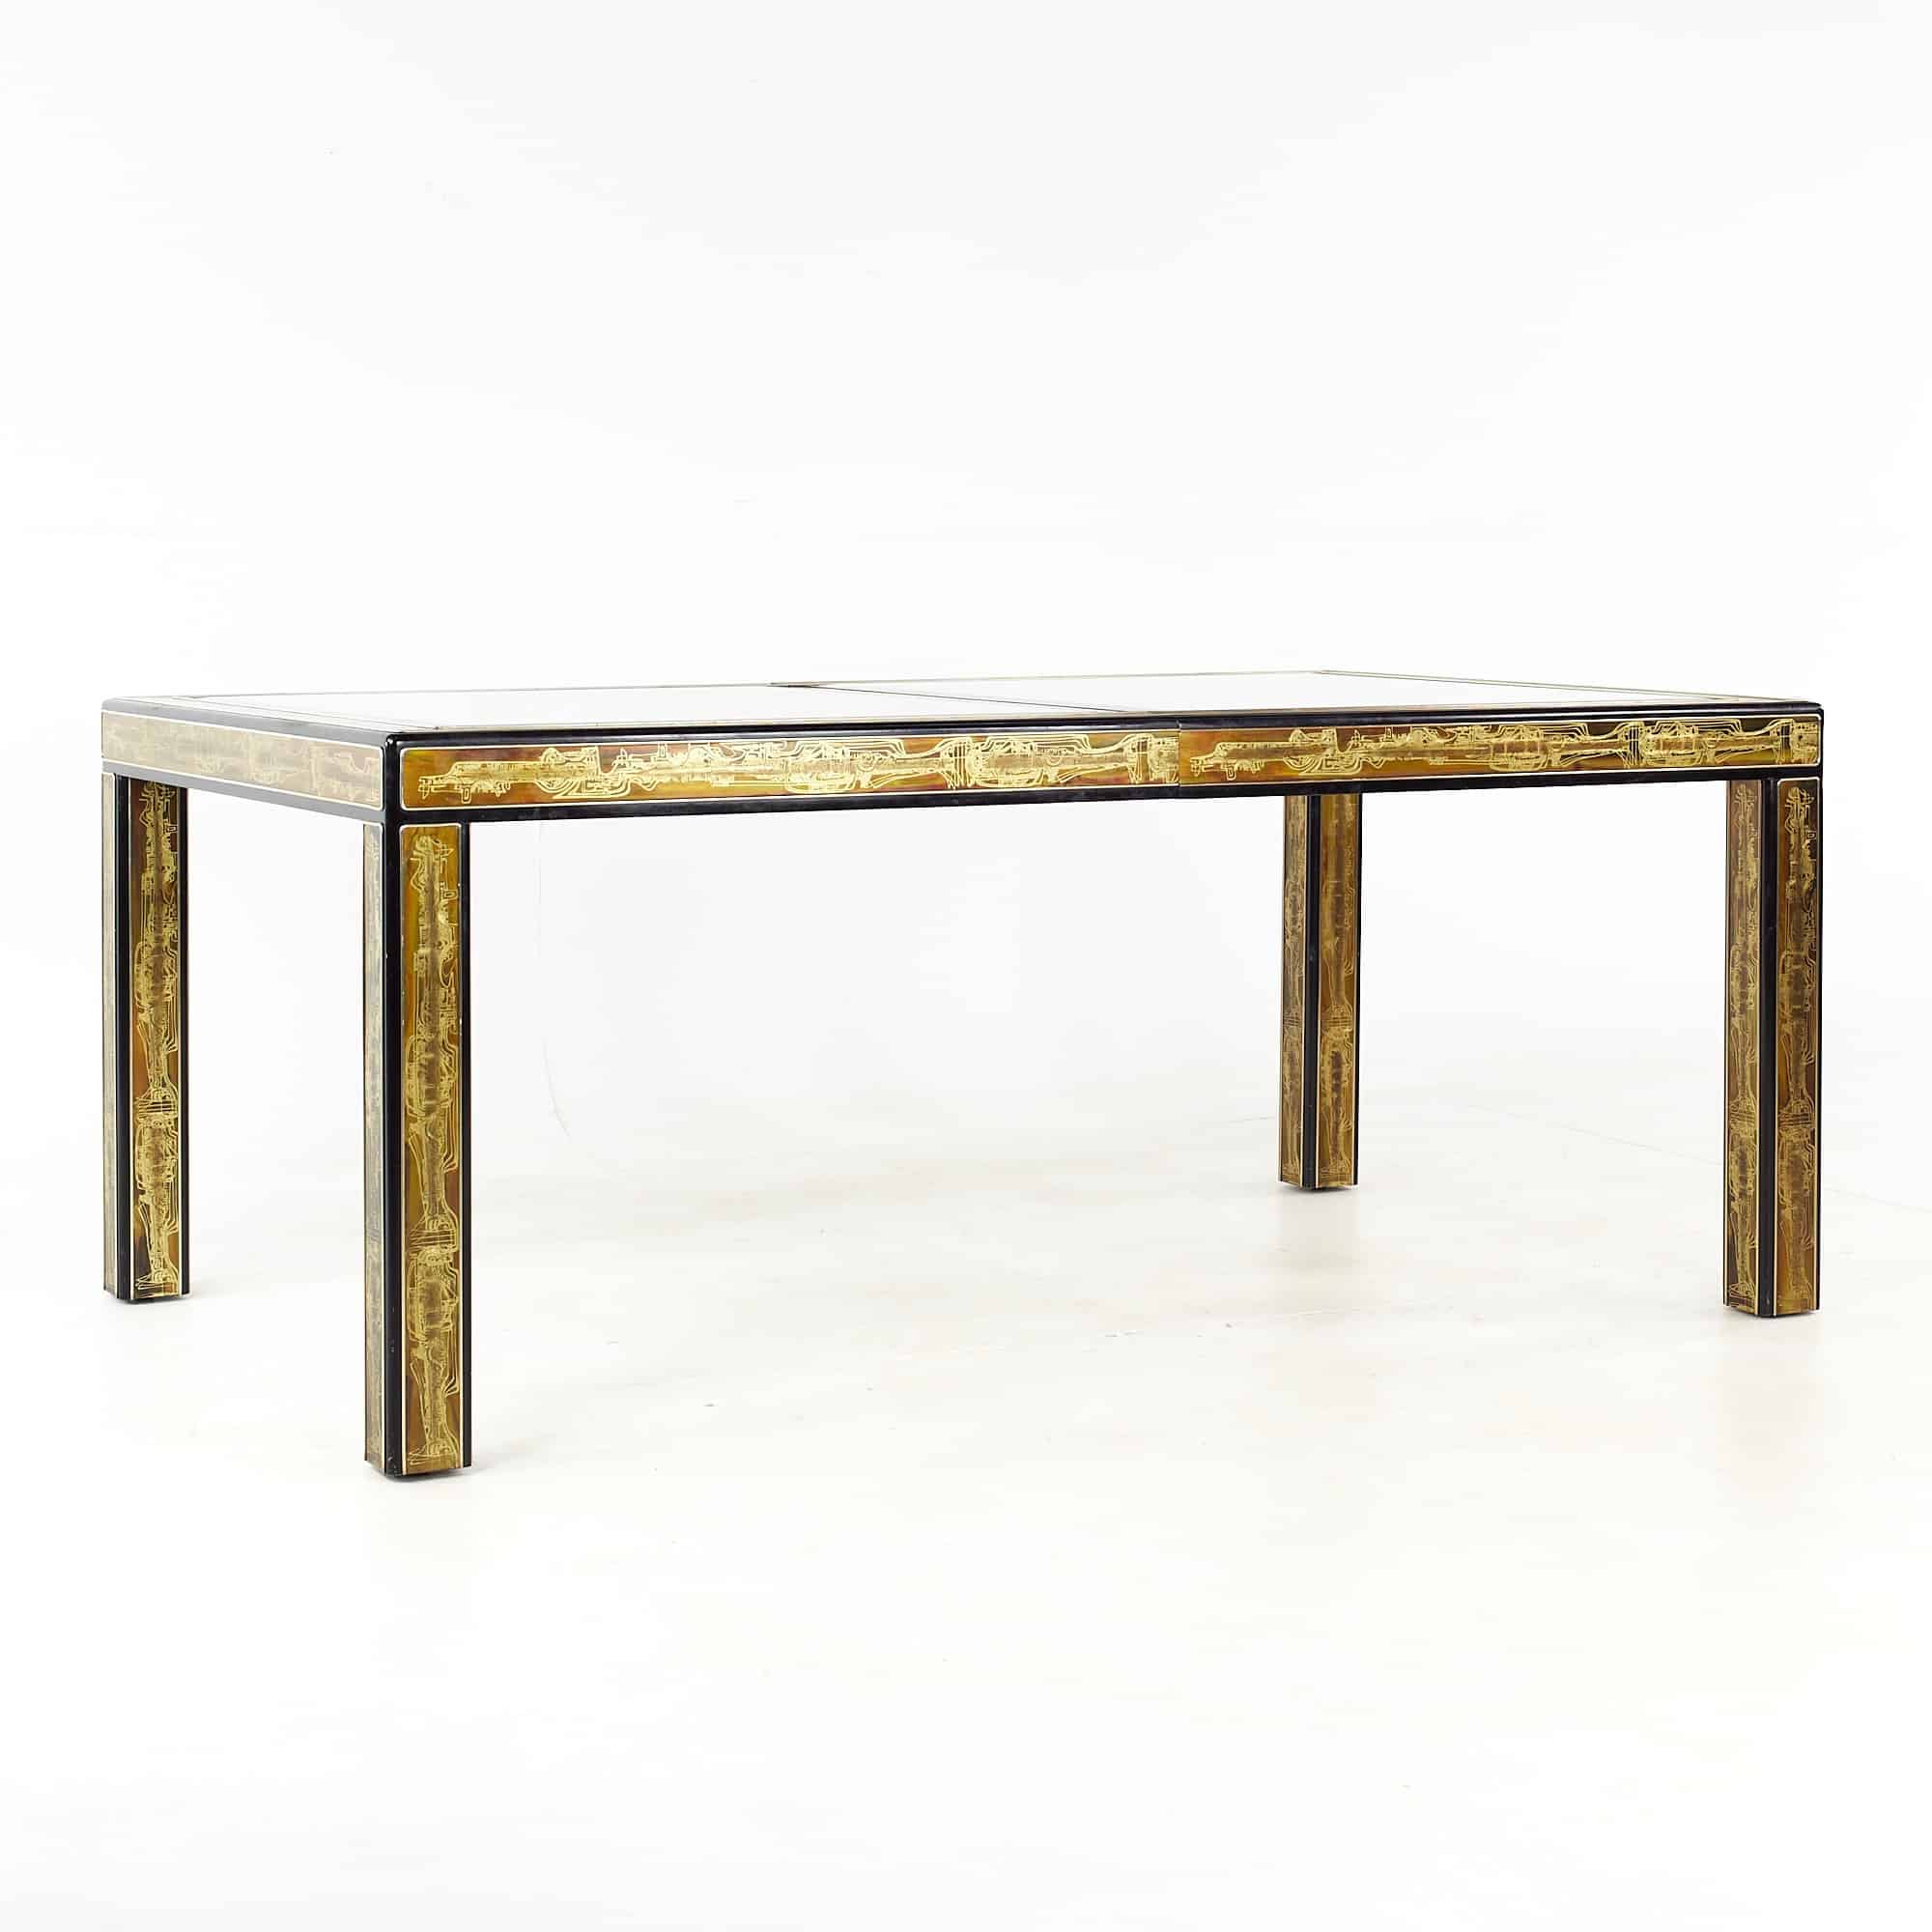 Bernhard Rohne for Mastercraft Mid Century Lacquered Etched Brass Panel Expanding Dining Table with 1 Leaf